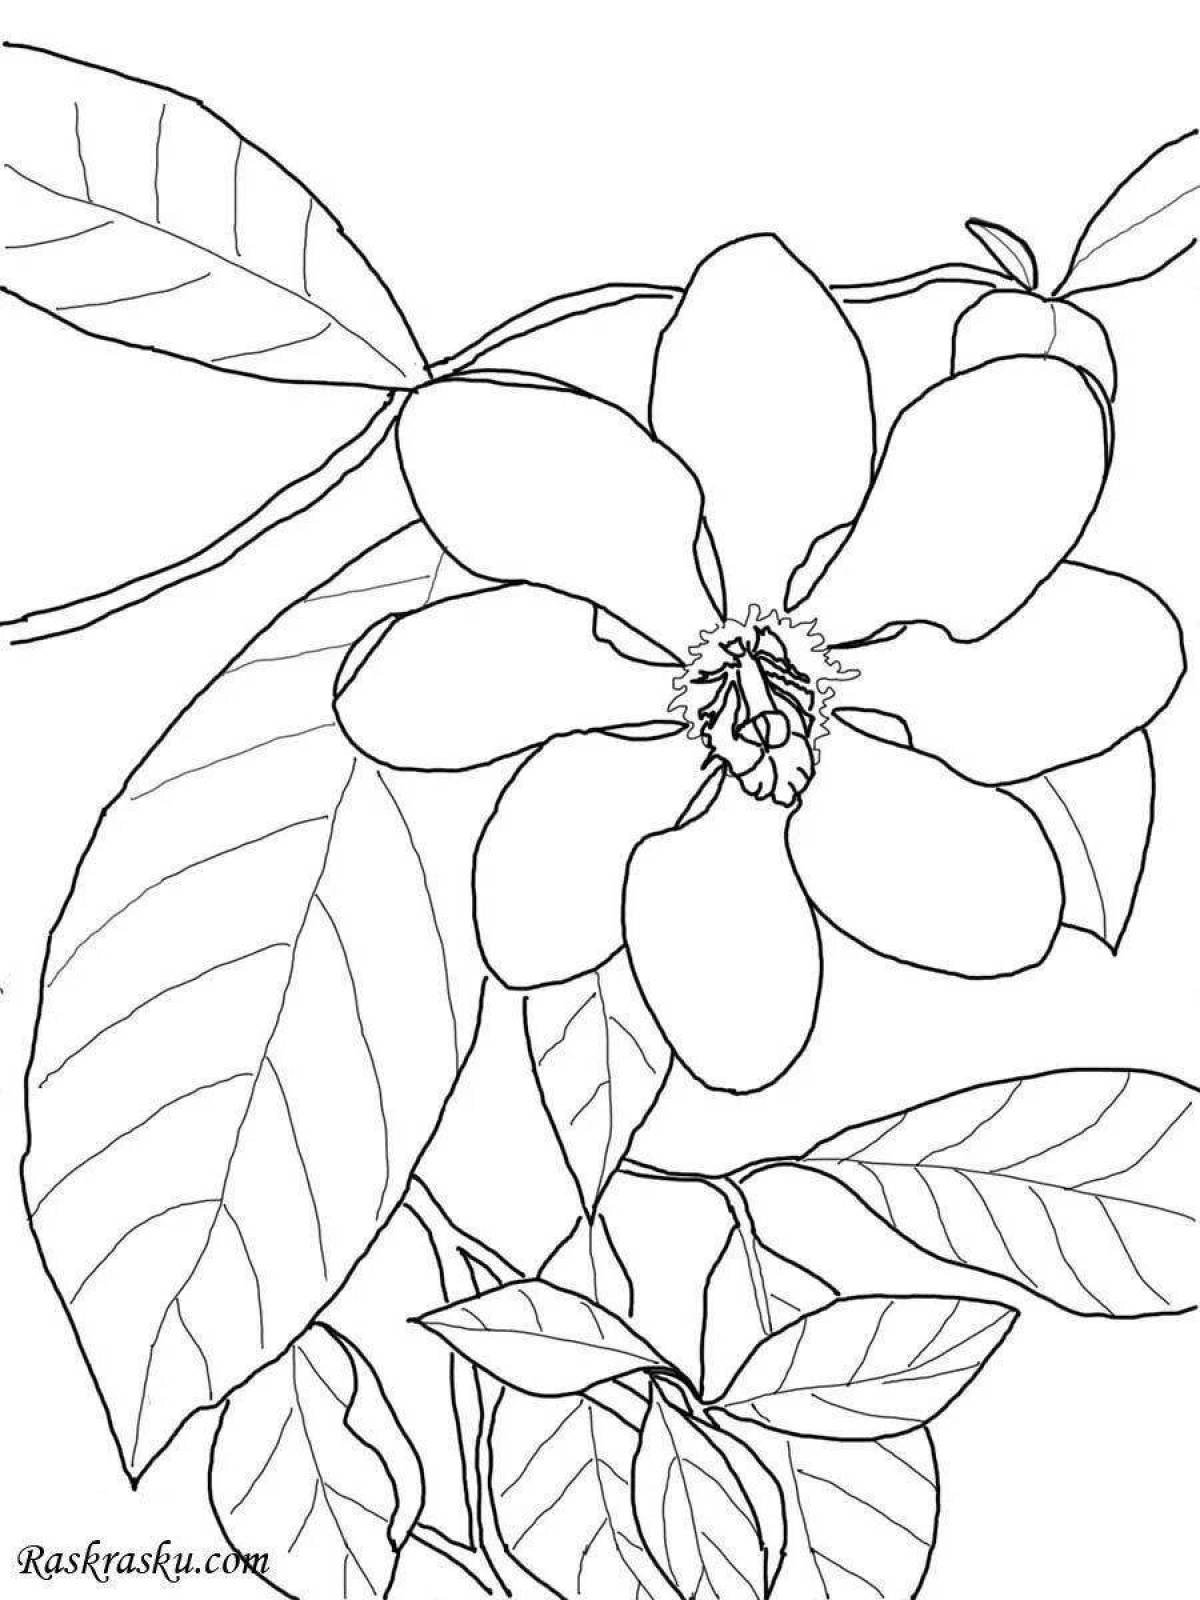 Coloring page cheerful jasmine flower